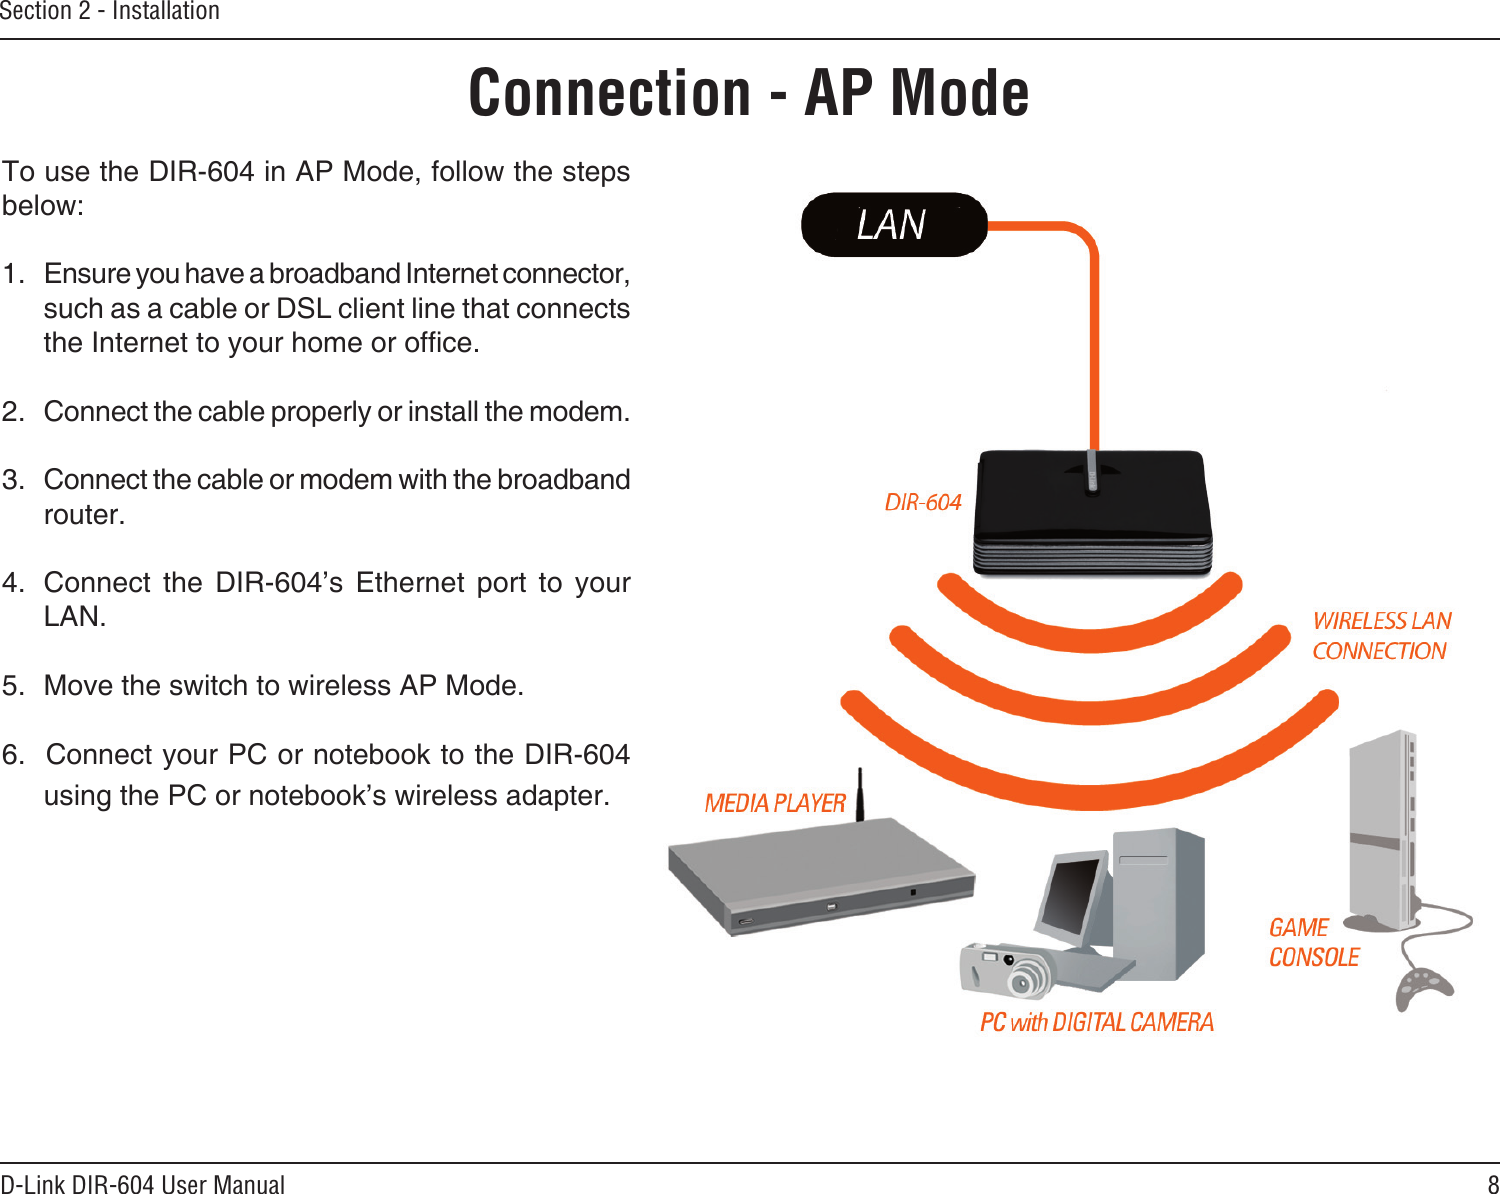 8D-Link DIR-604 User ManualSection 2 - InstallationConnection - AP ModeTo use the DIR-604 in AP Mode, follow the steps below:1.  Ensure you have a broadband Internet connector, such as a cable or DSL client line that connects the Internet to your home or ofce. 2.  Connect the cable properly or install the modem.3.  Connect the cable or modem with the broadband router.  4.  Connect  the  DIR-604’s  Ethernet  port  to  your LAN. 5.  Move the switch to wireless AP Mode. 6.  Connect your PC or notebook to the DIR-604 using the PC or notebook’s wireless adapter. 